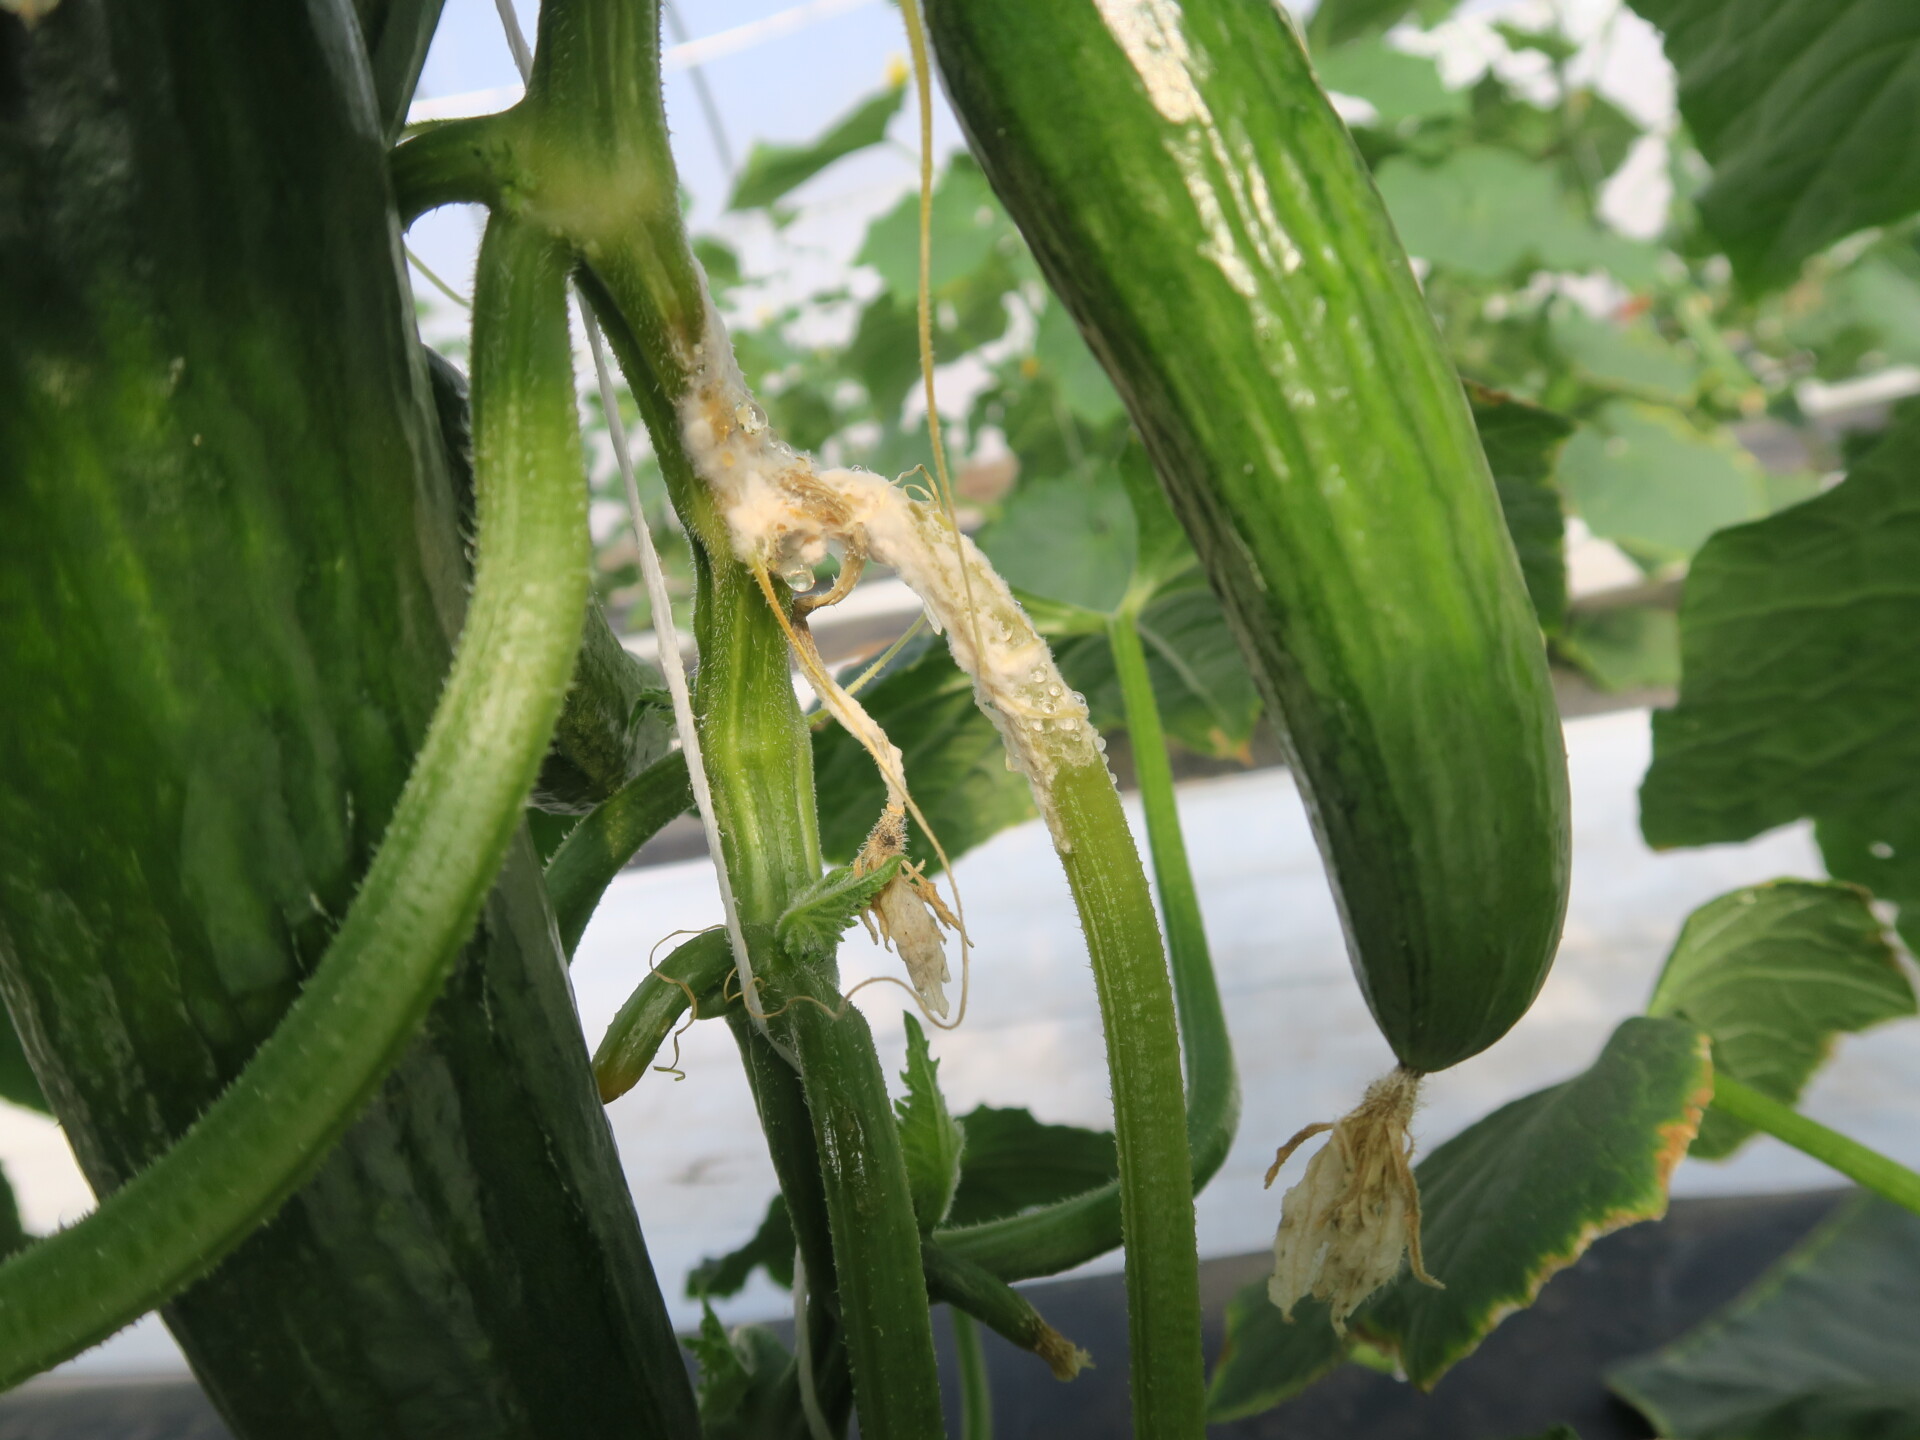  White mold of cucumber.